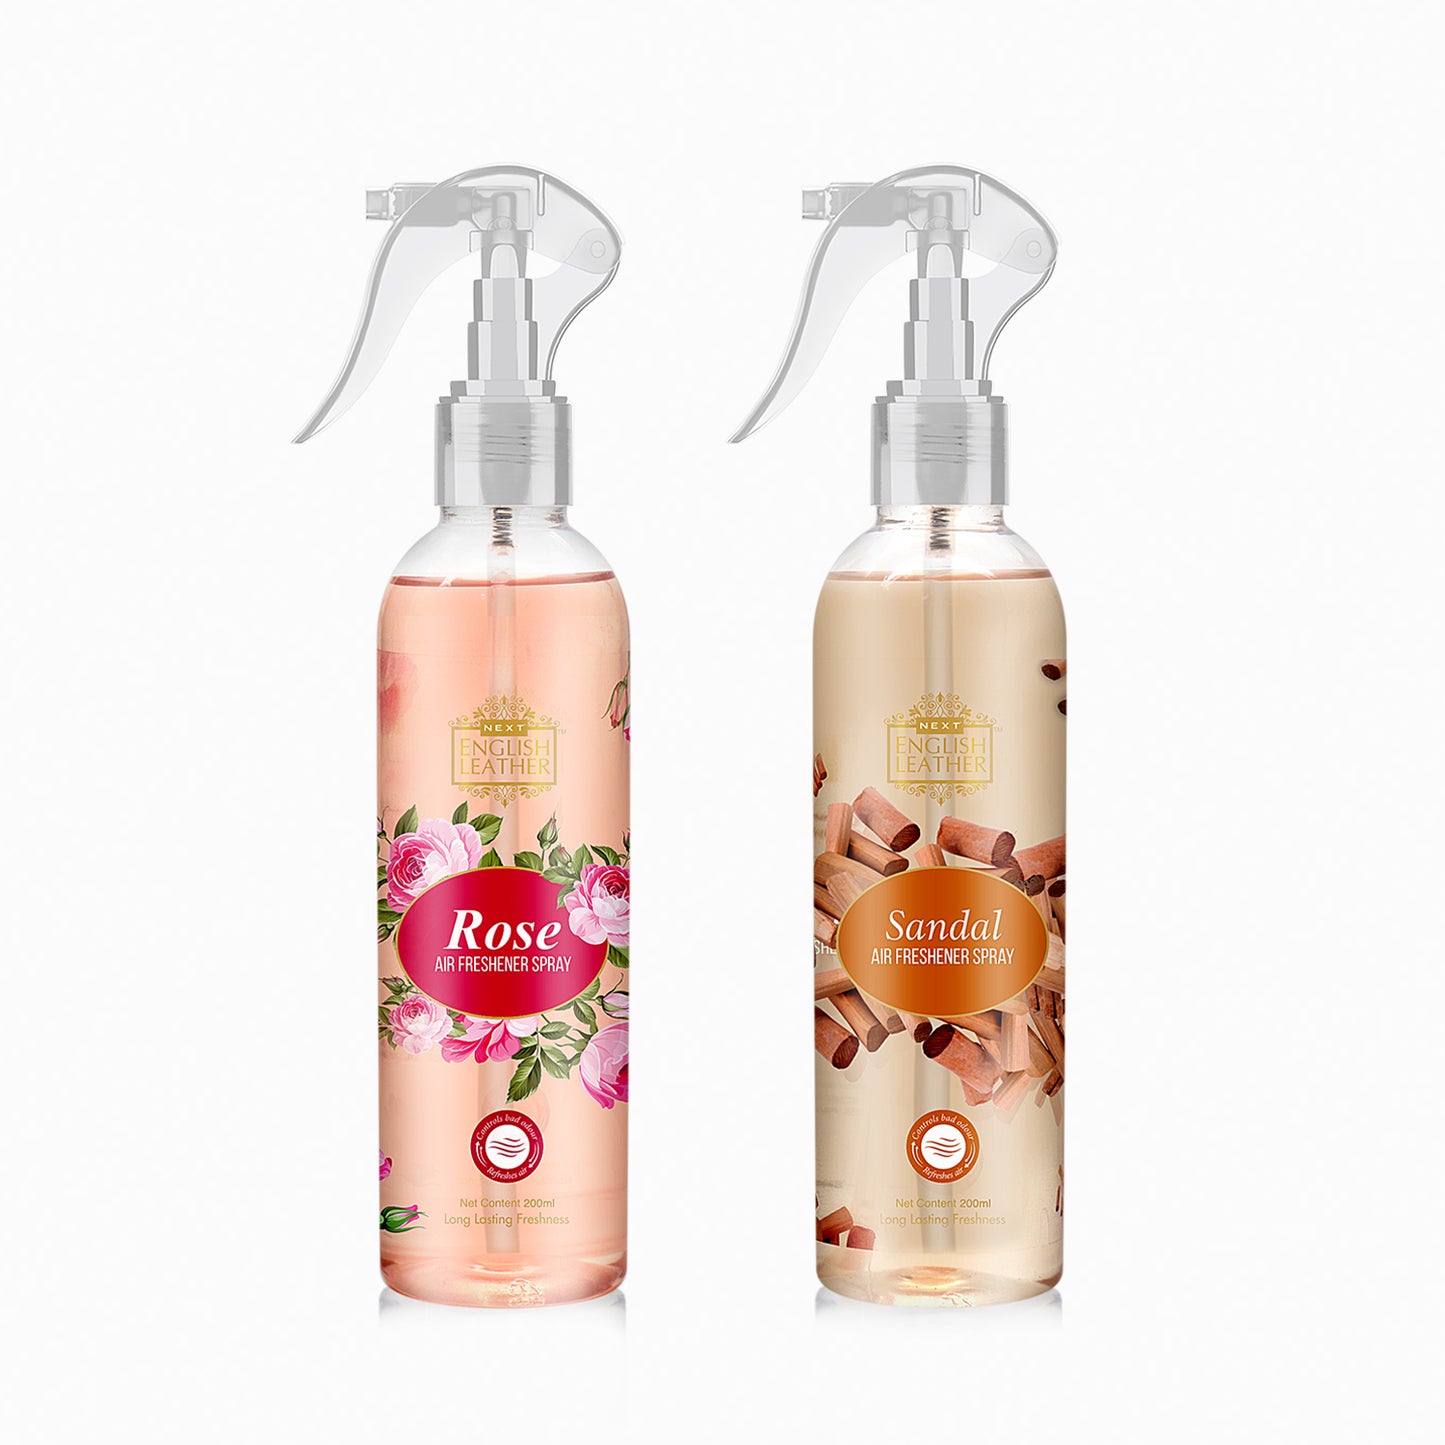 Next English Leather Rose  and Sandal Combo No Gas Room Air Freshener Spray - 200ml Each